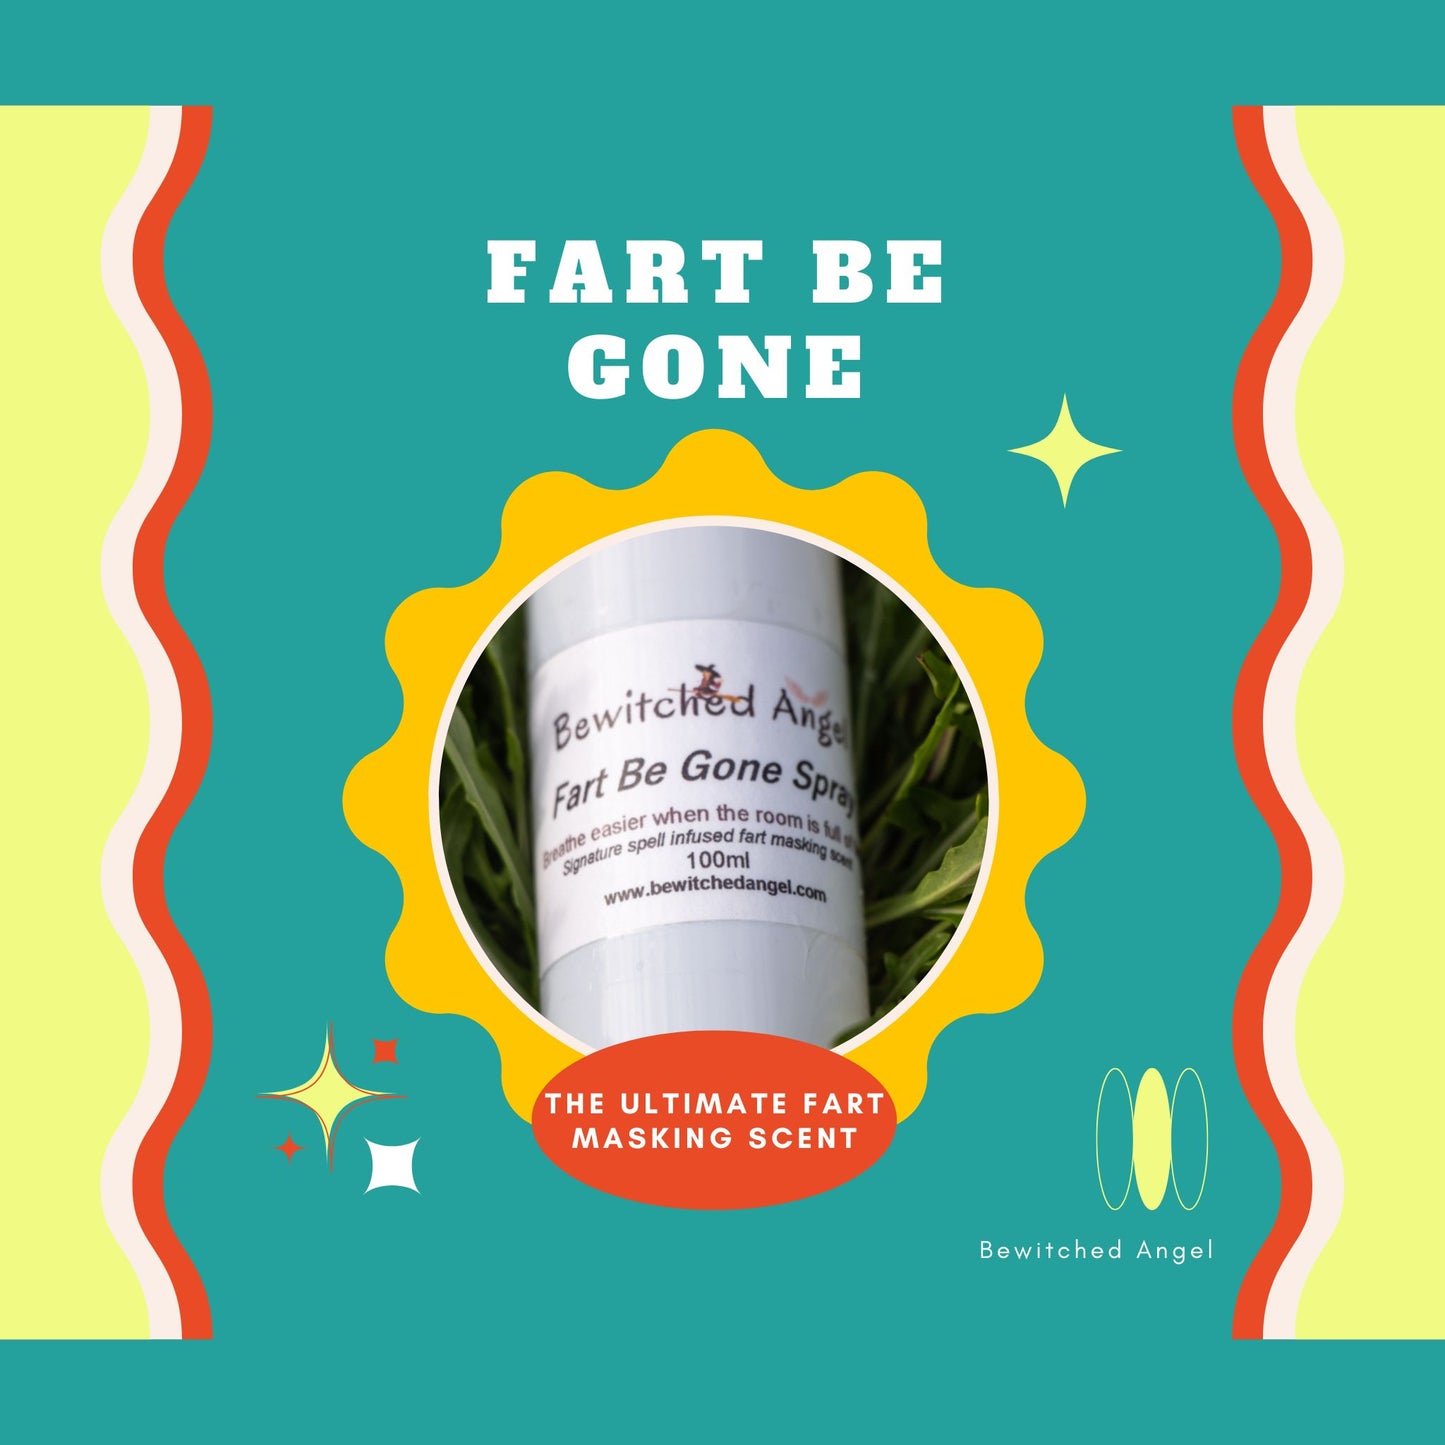 Fart Be Gone Spray - Stop choking on stinky farts